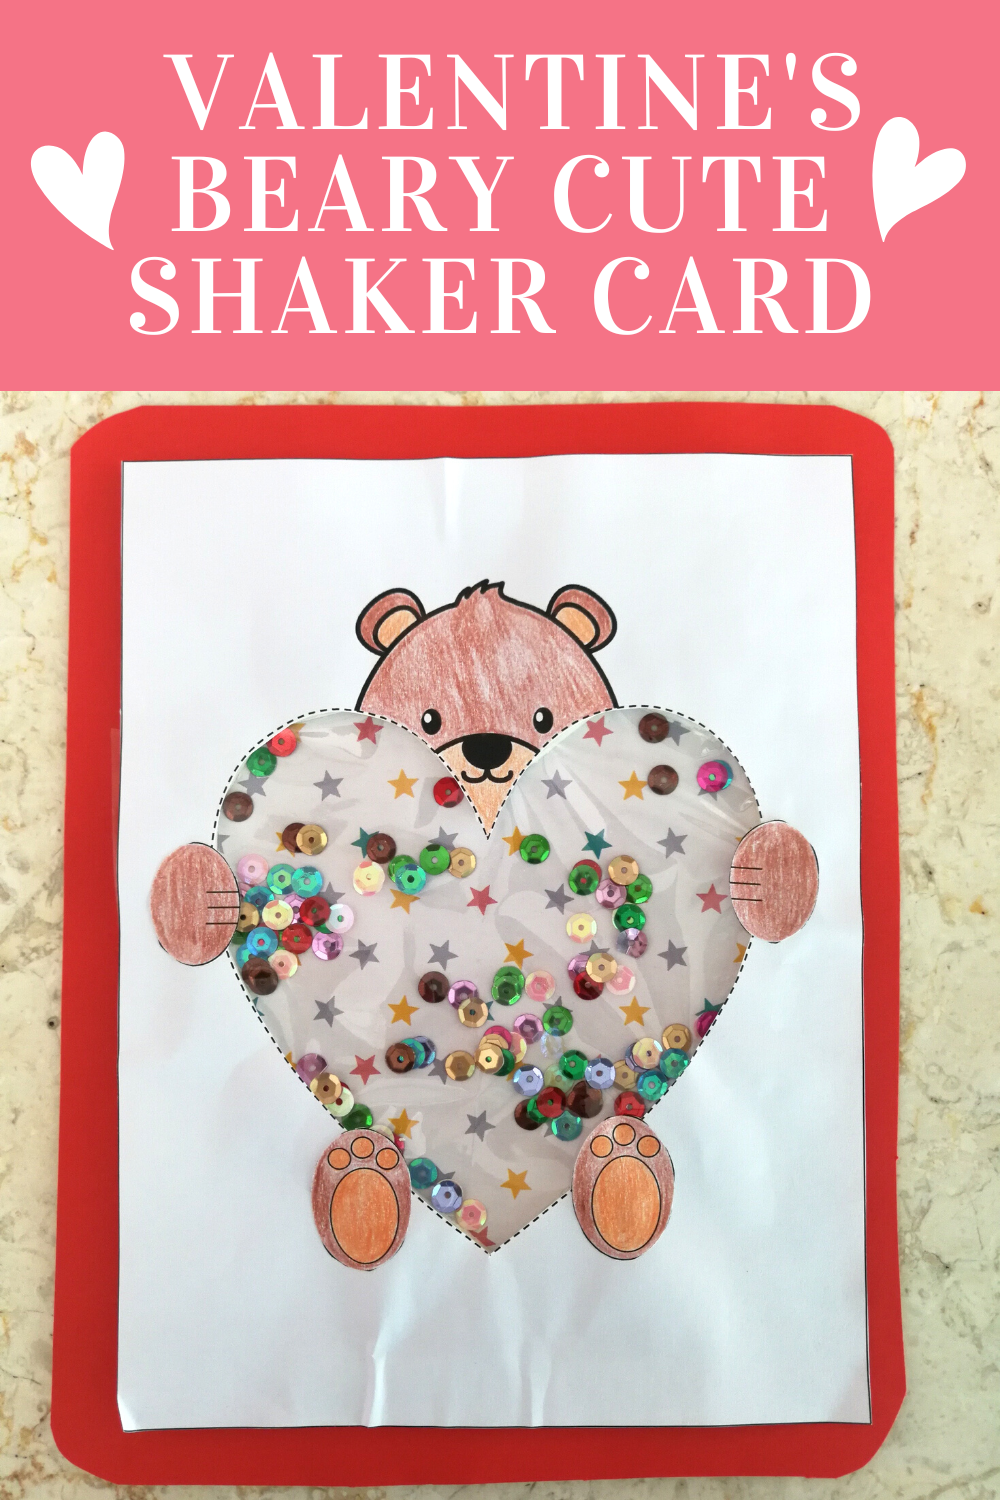 Free Printable Valentine’s Day Shaker Card (Bear Hugging A Heart)